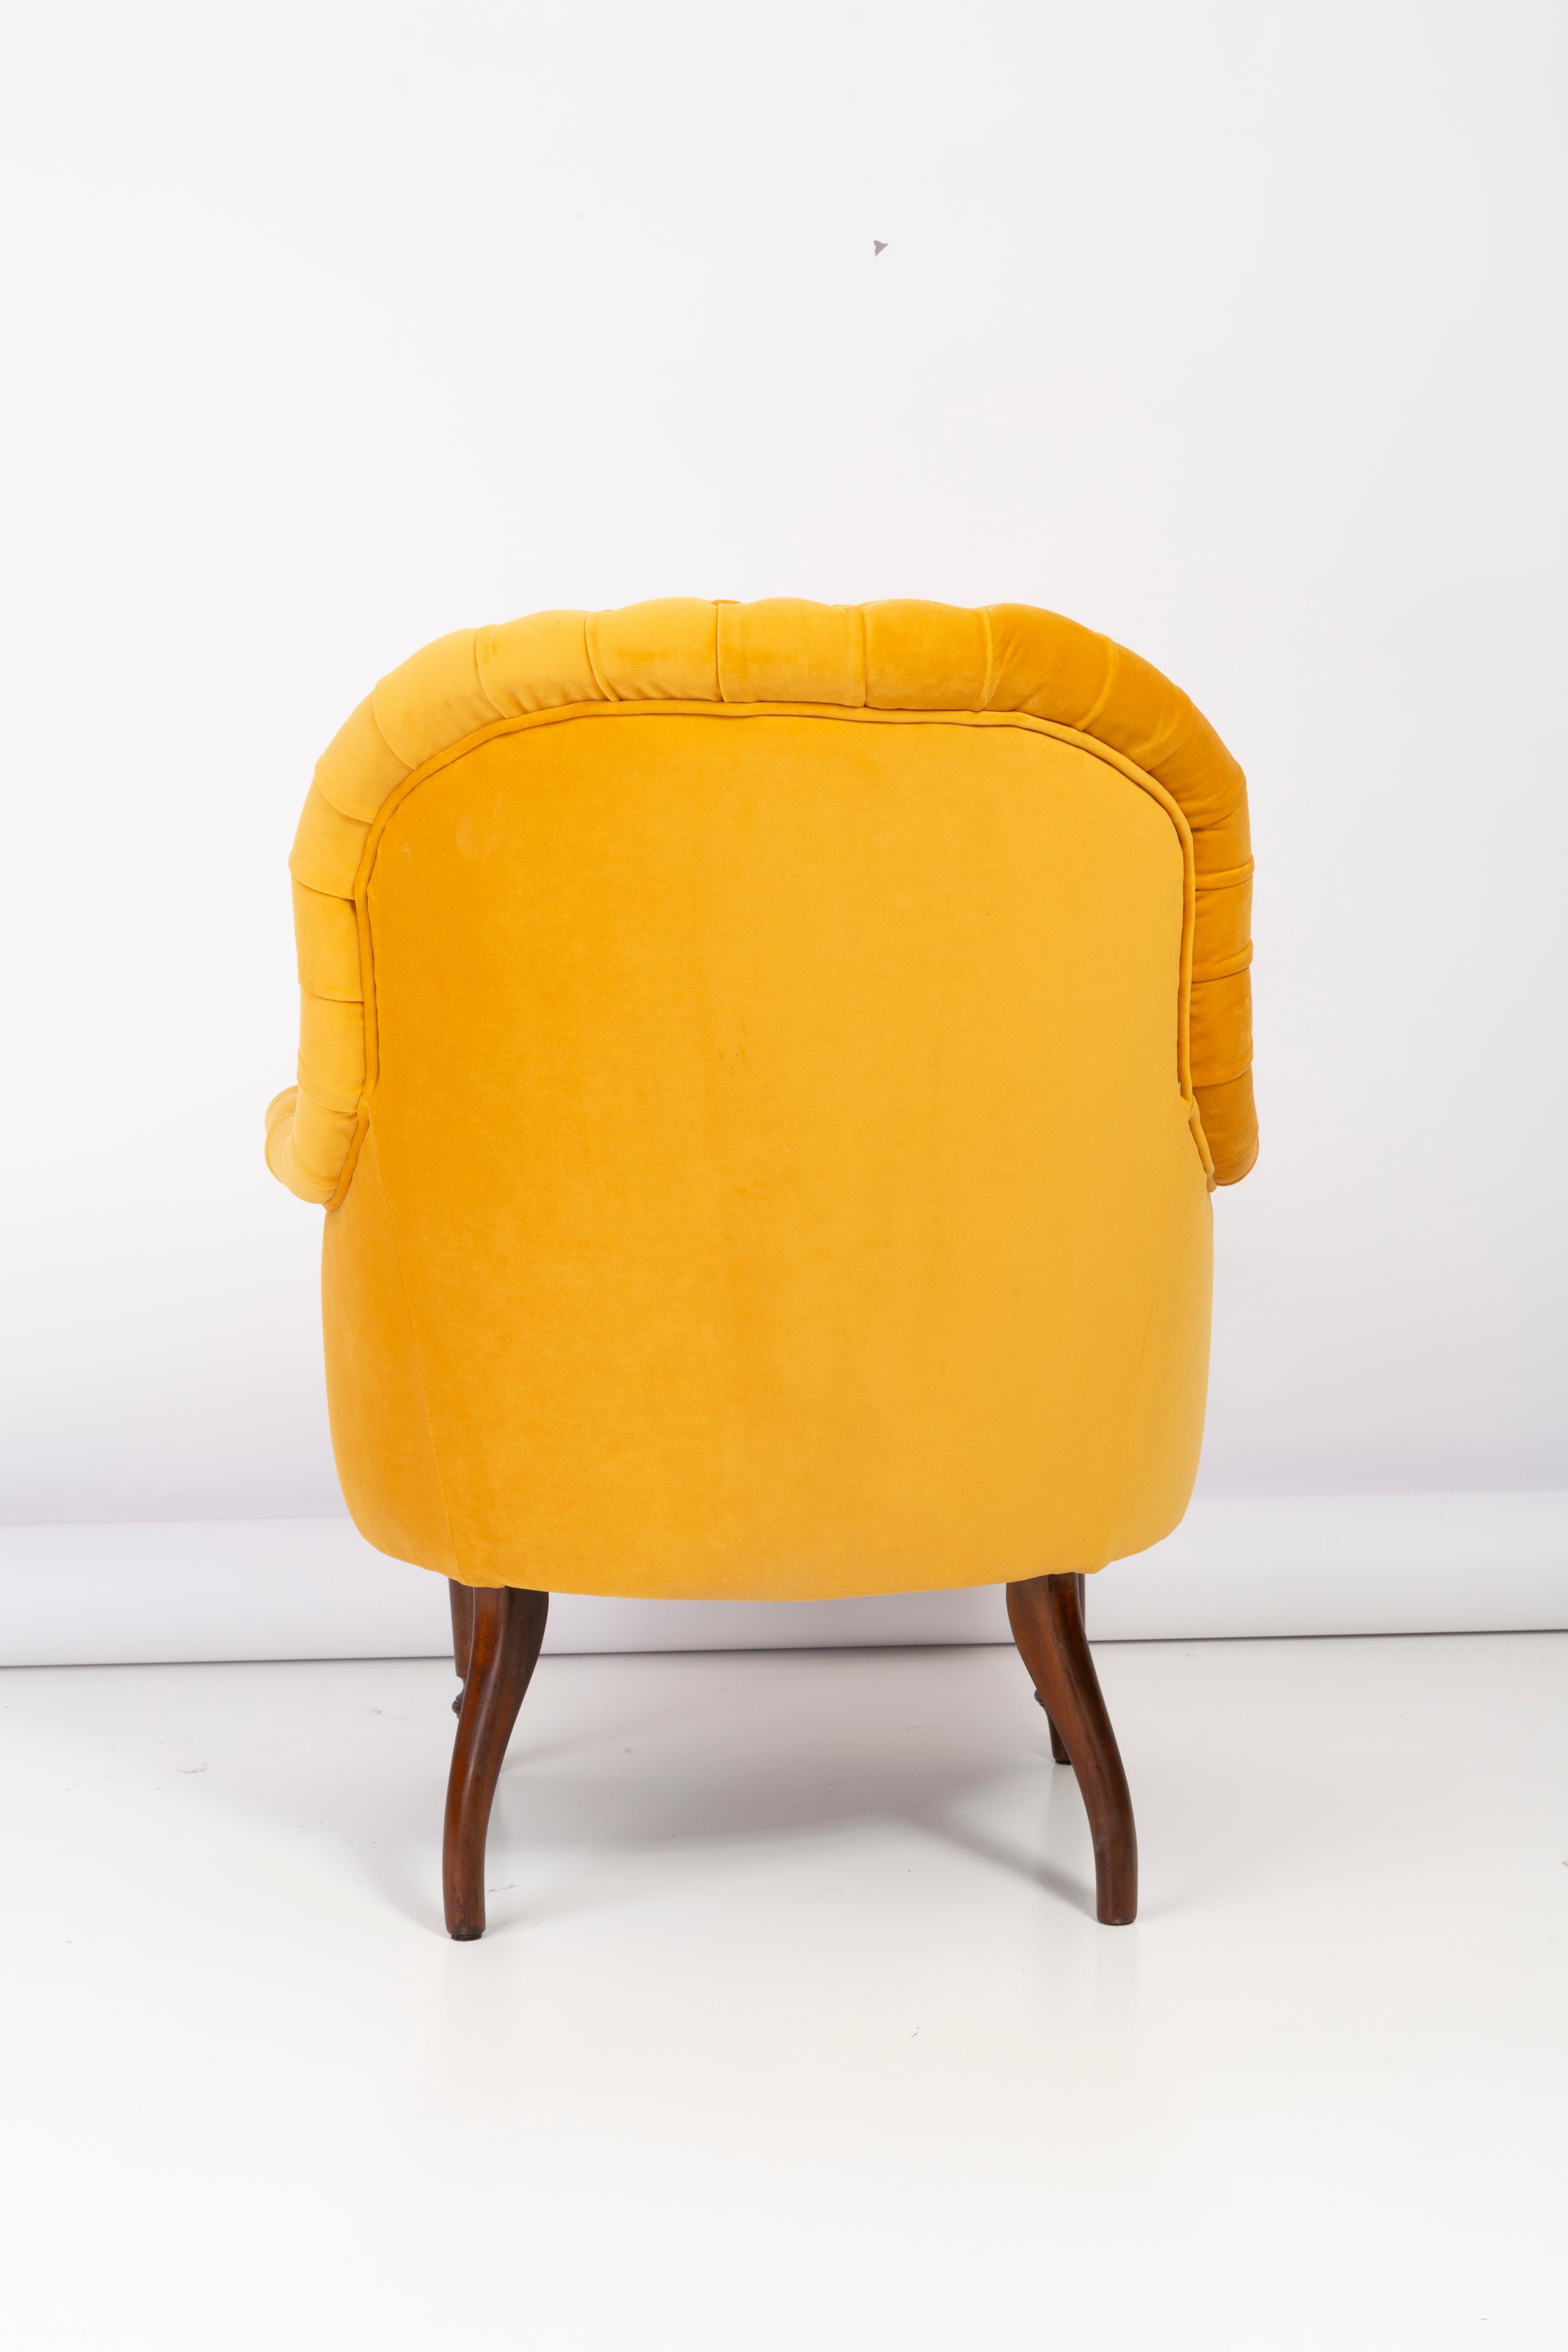 Pair of Unique Yellow Mustard Armchairs, 1930s, Germany For Sale 9